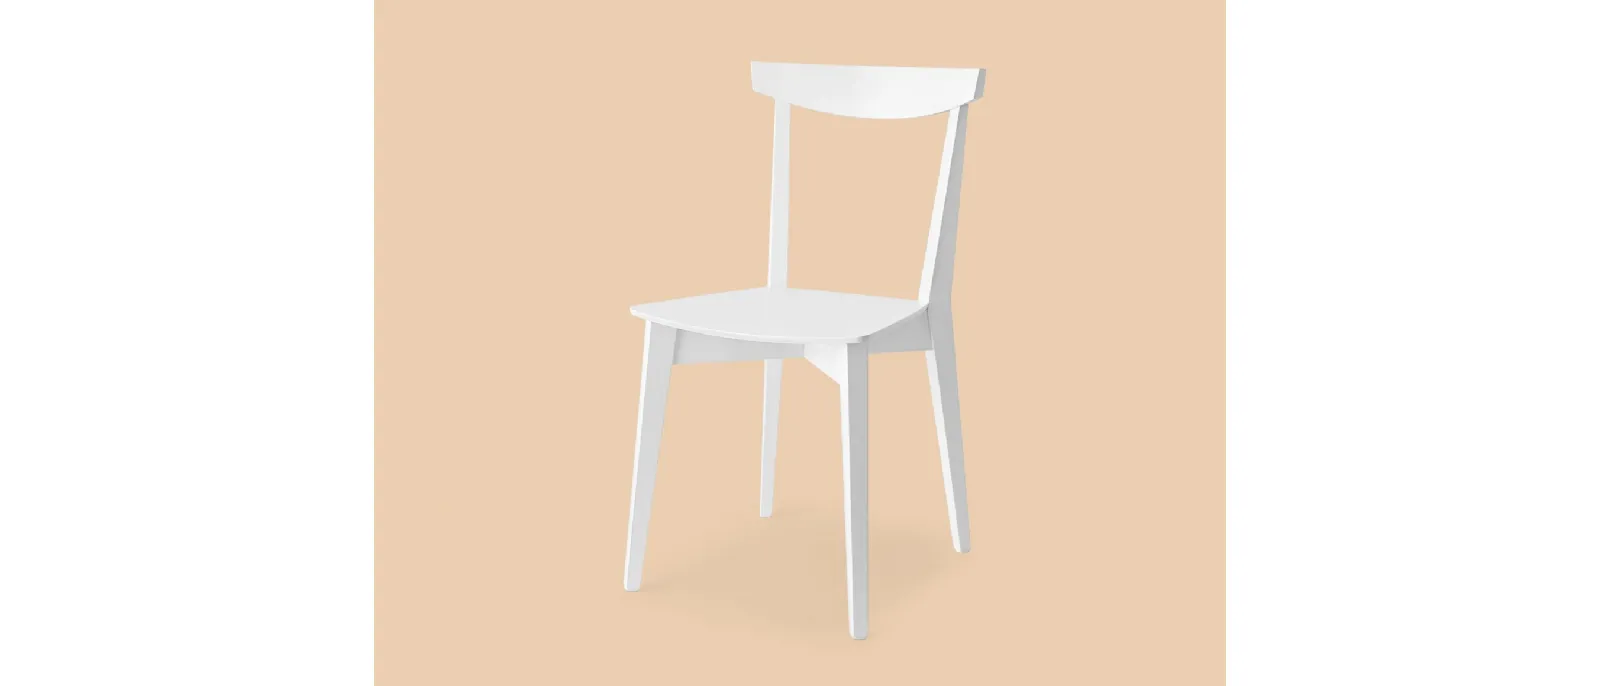 Solid beech chair, covering in technical fabric, Evergreen by Connubia